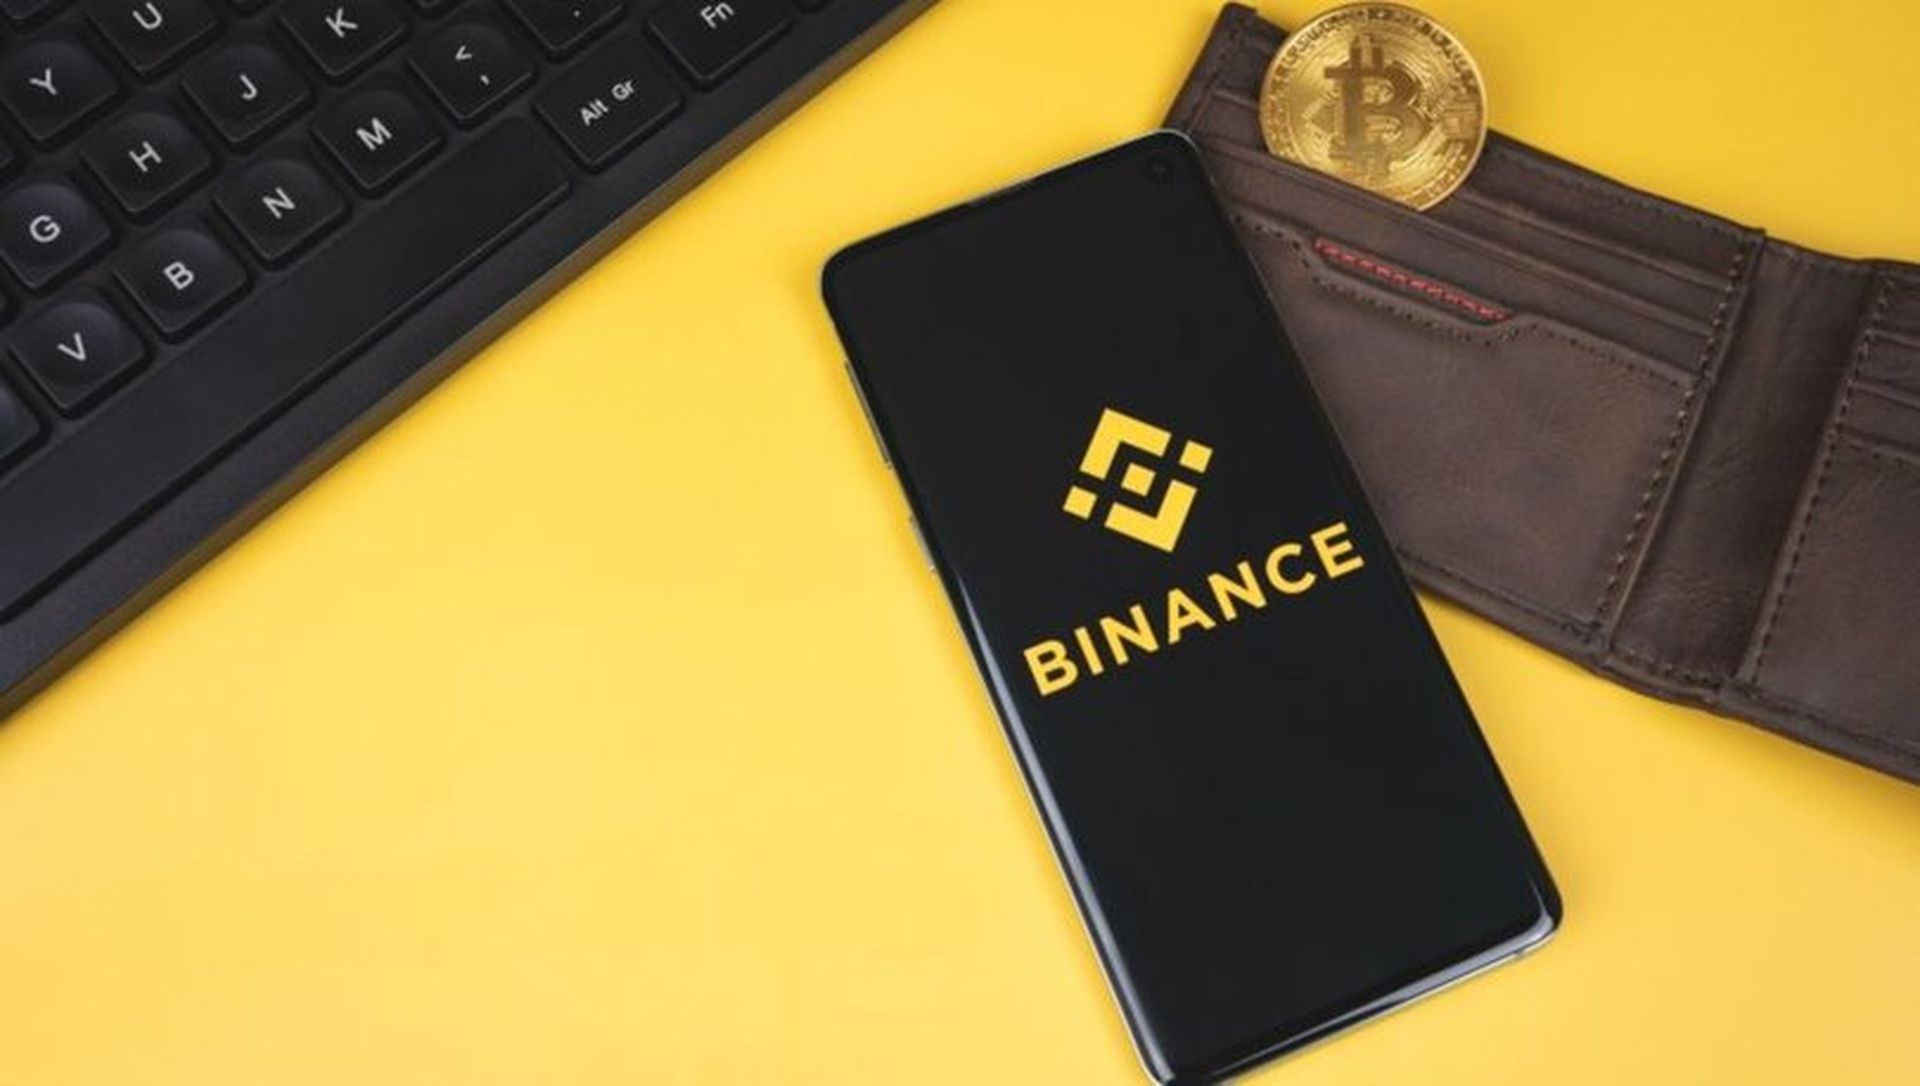 Today, we are here to show you the Binance Crypto WODL answers (29 August). If you find the correct cryptocurrency term in the Binance news, you might win a...